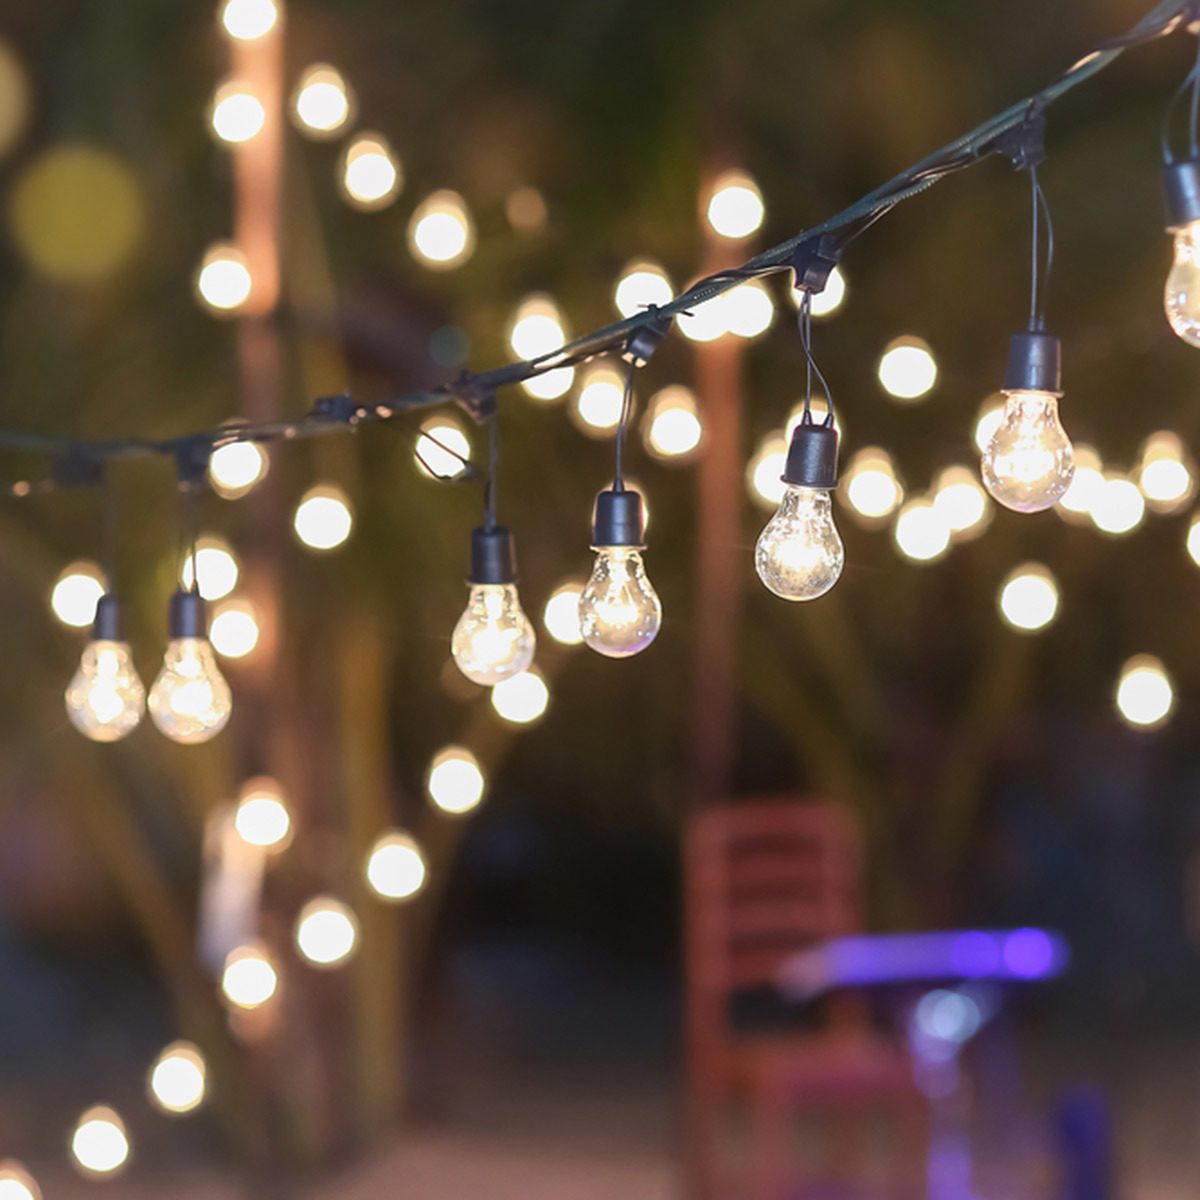 15 Outdoor String Lights That Will Make You Want To Live Outside